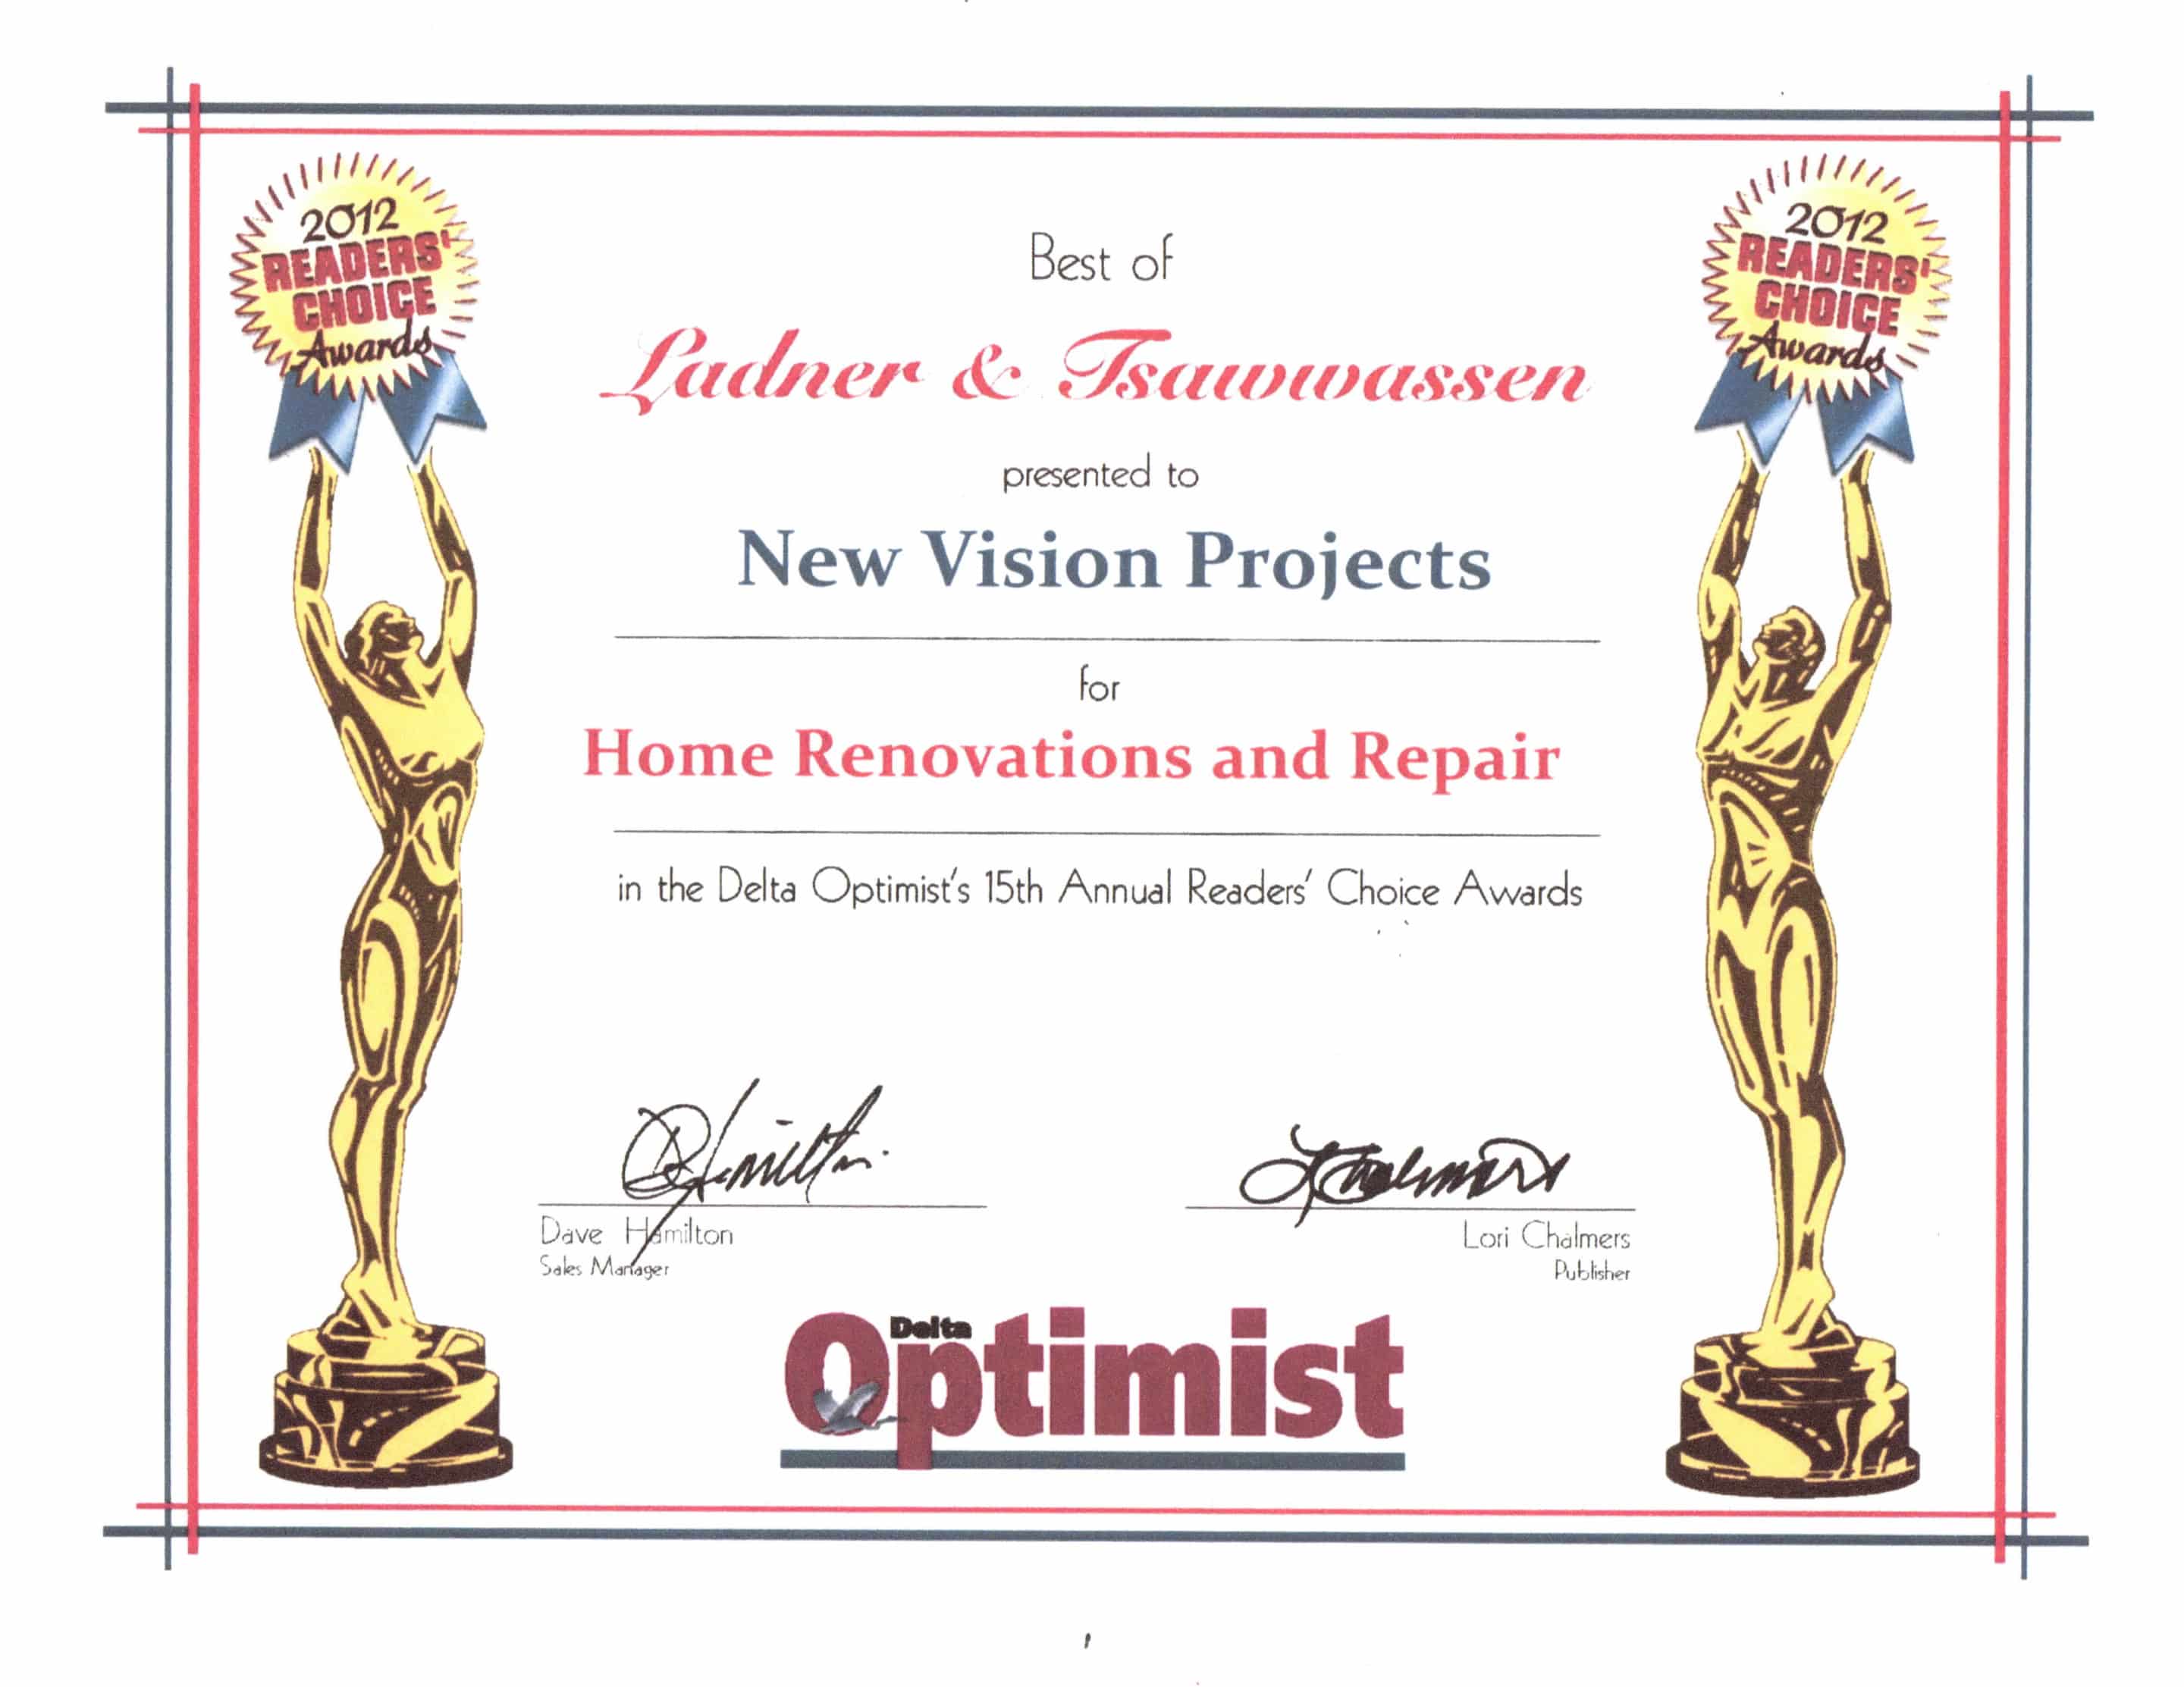 2012 Delta Optimist Readers Choice Awards – Best Home Renovations and Repair